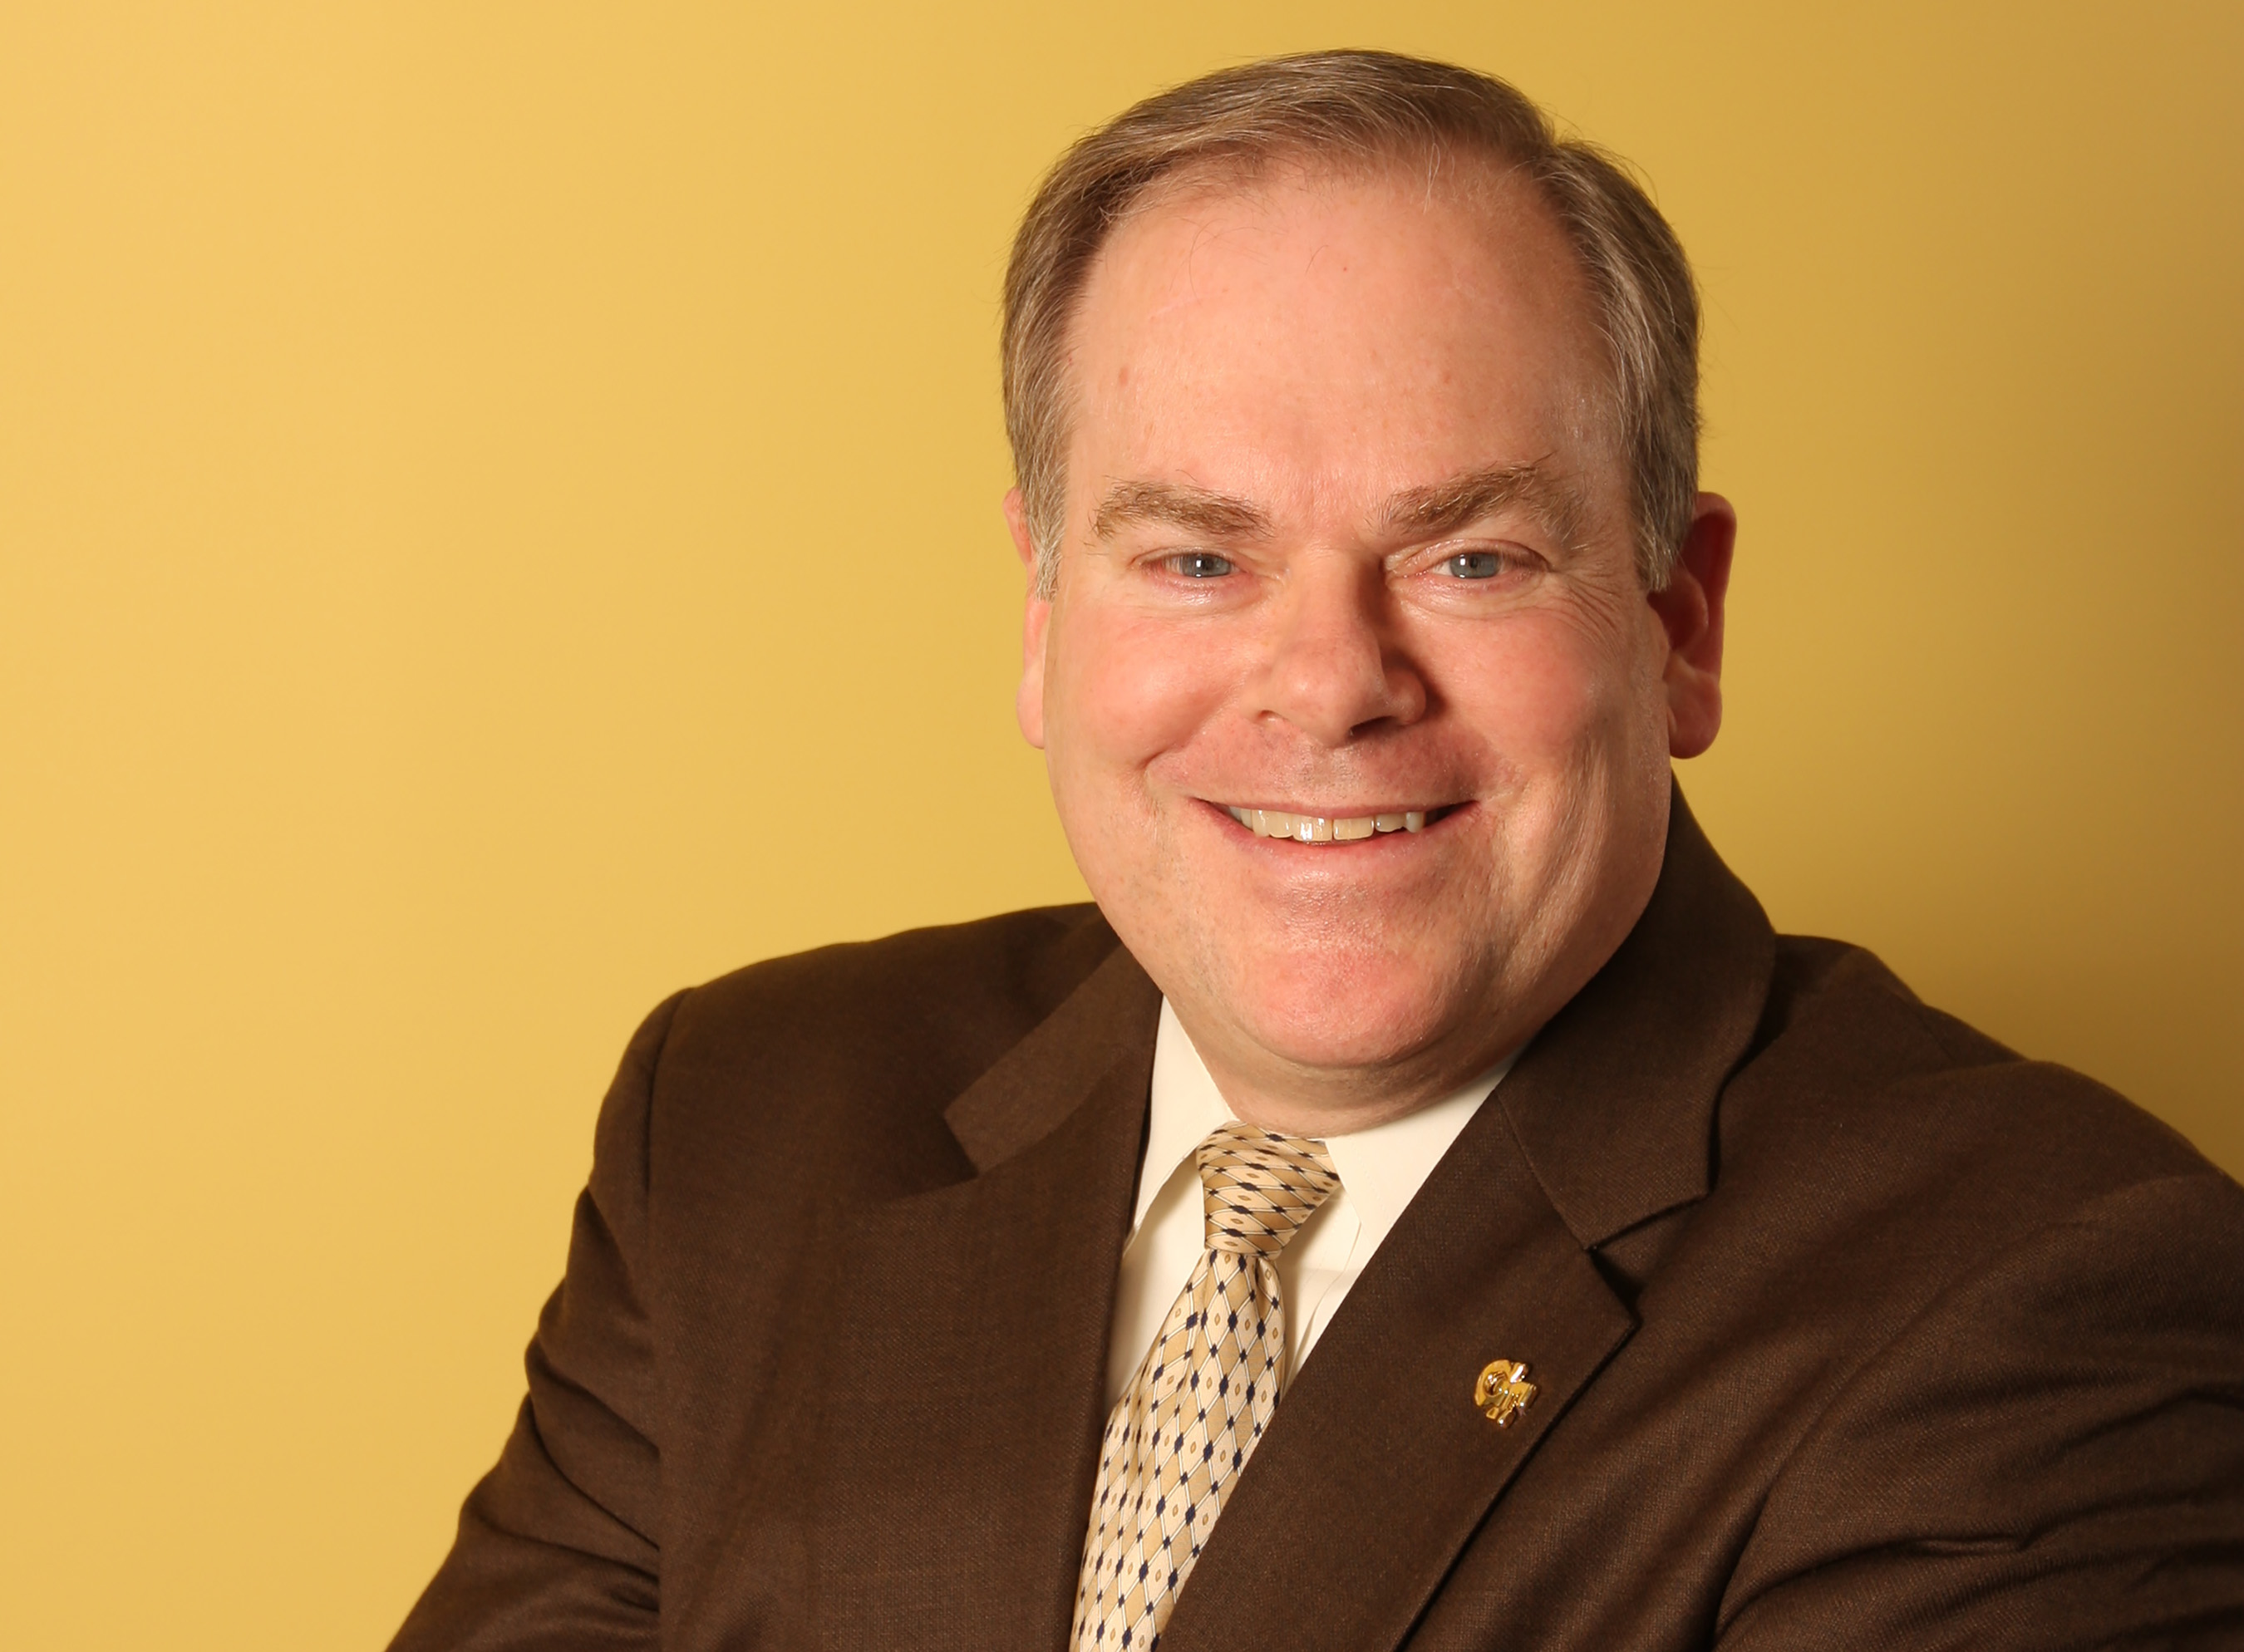 Steve Cross is Georgia Tech's Executive Vice President for Research.